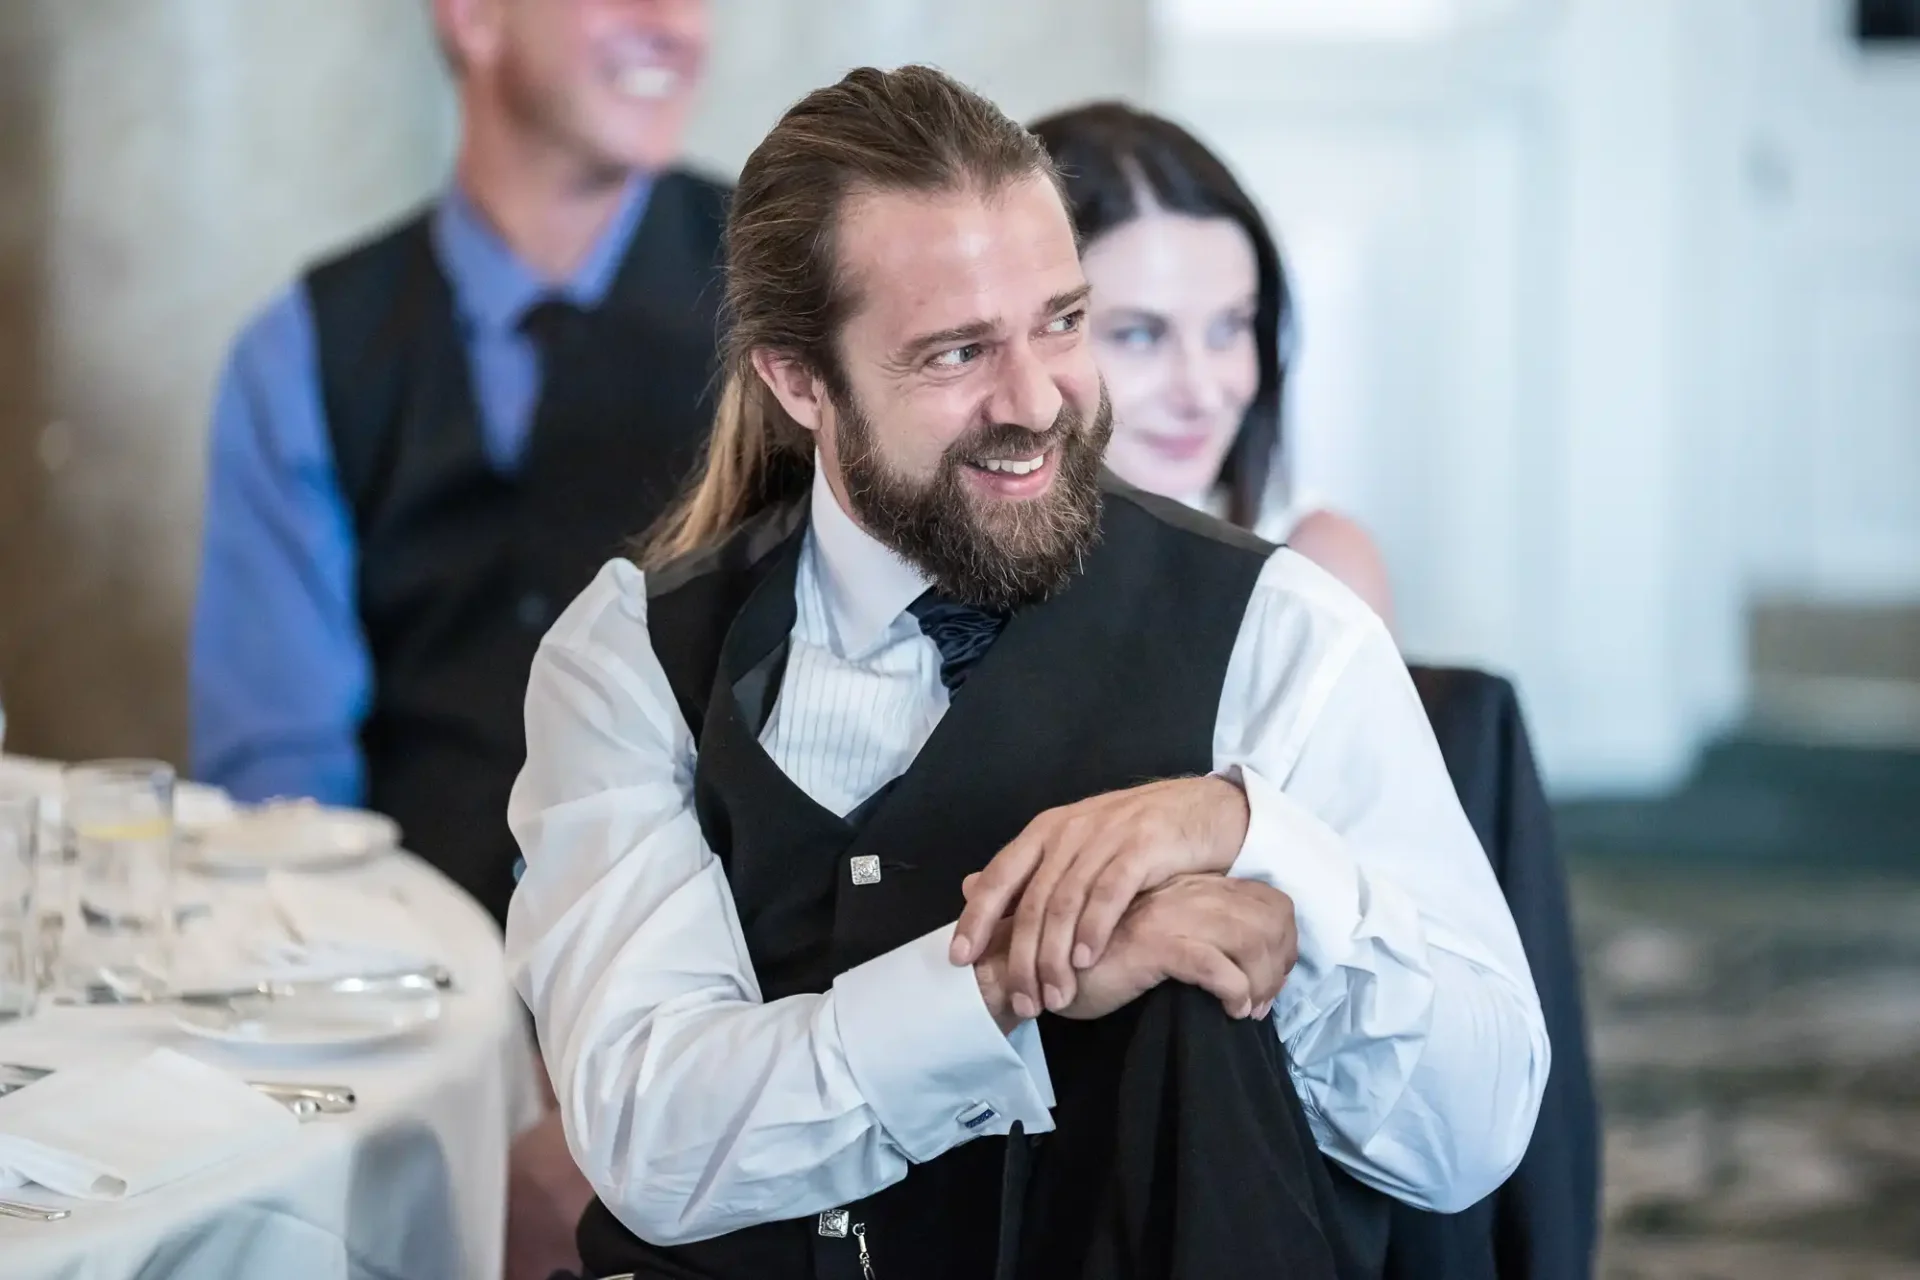 A man with a beard, wearing a vest and tie, smiles warmly at a wedding reception, with guests visible in the background.